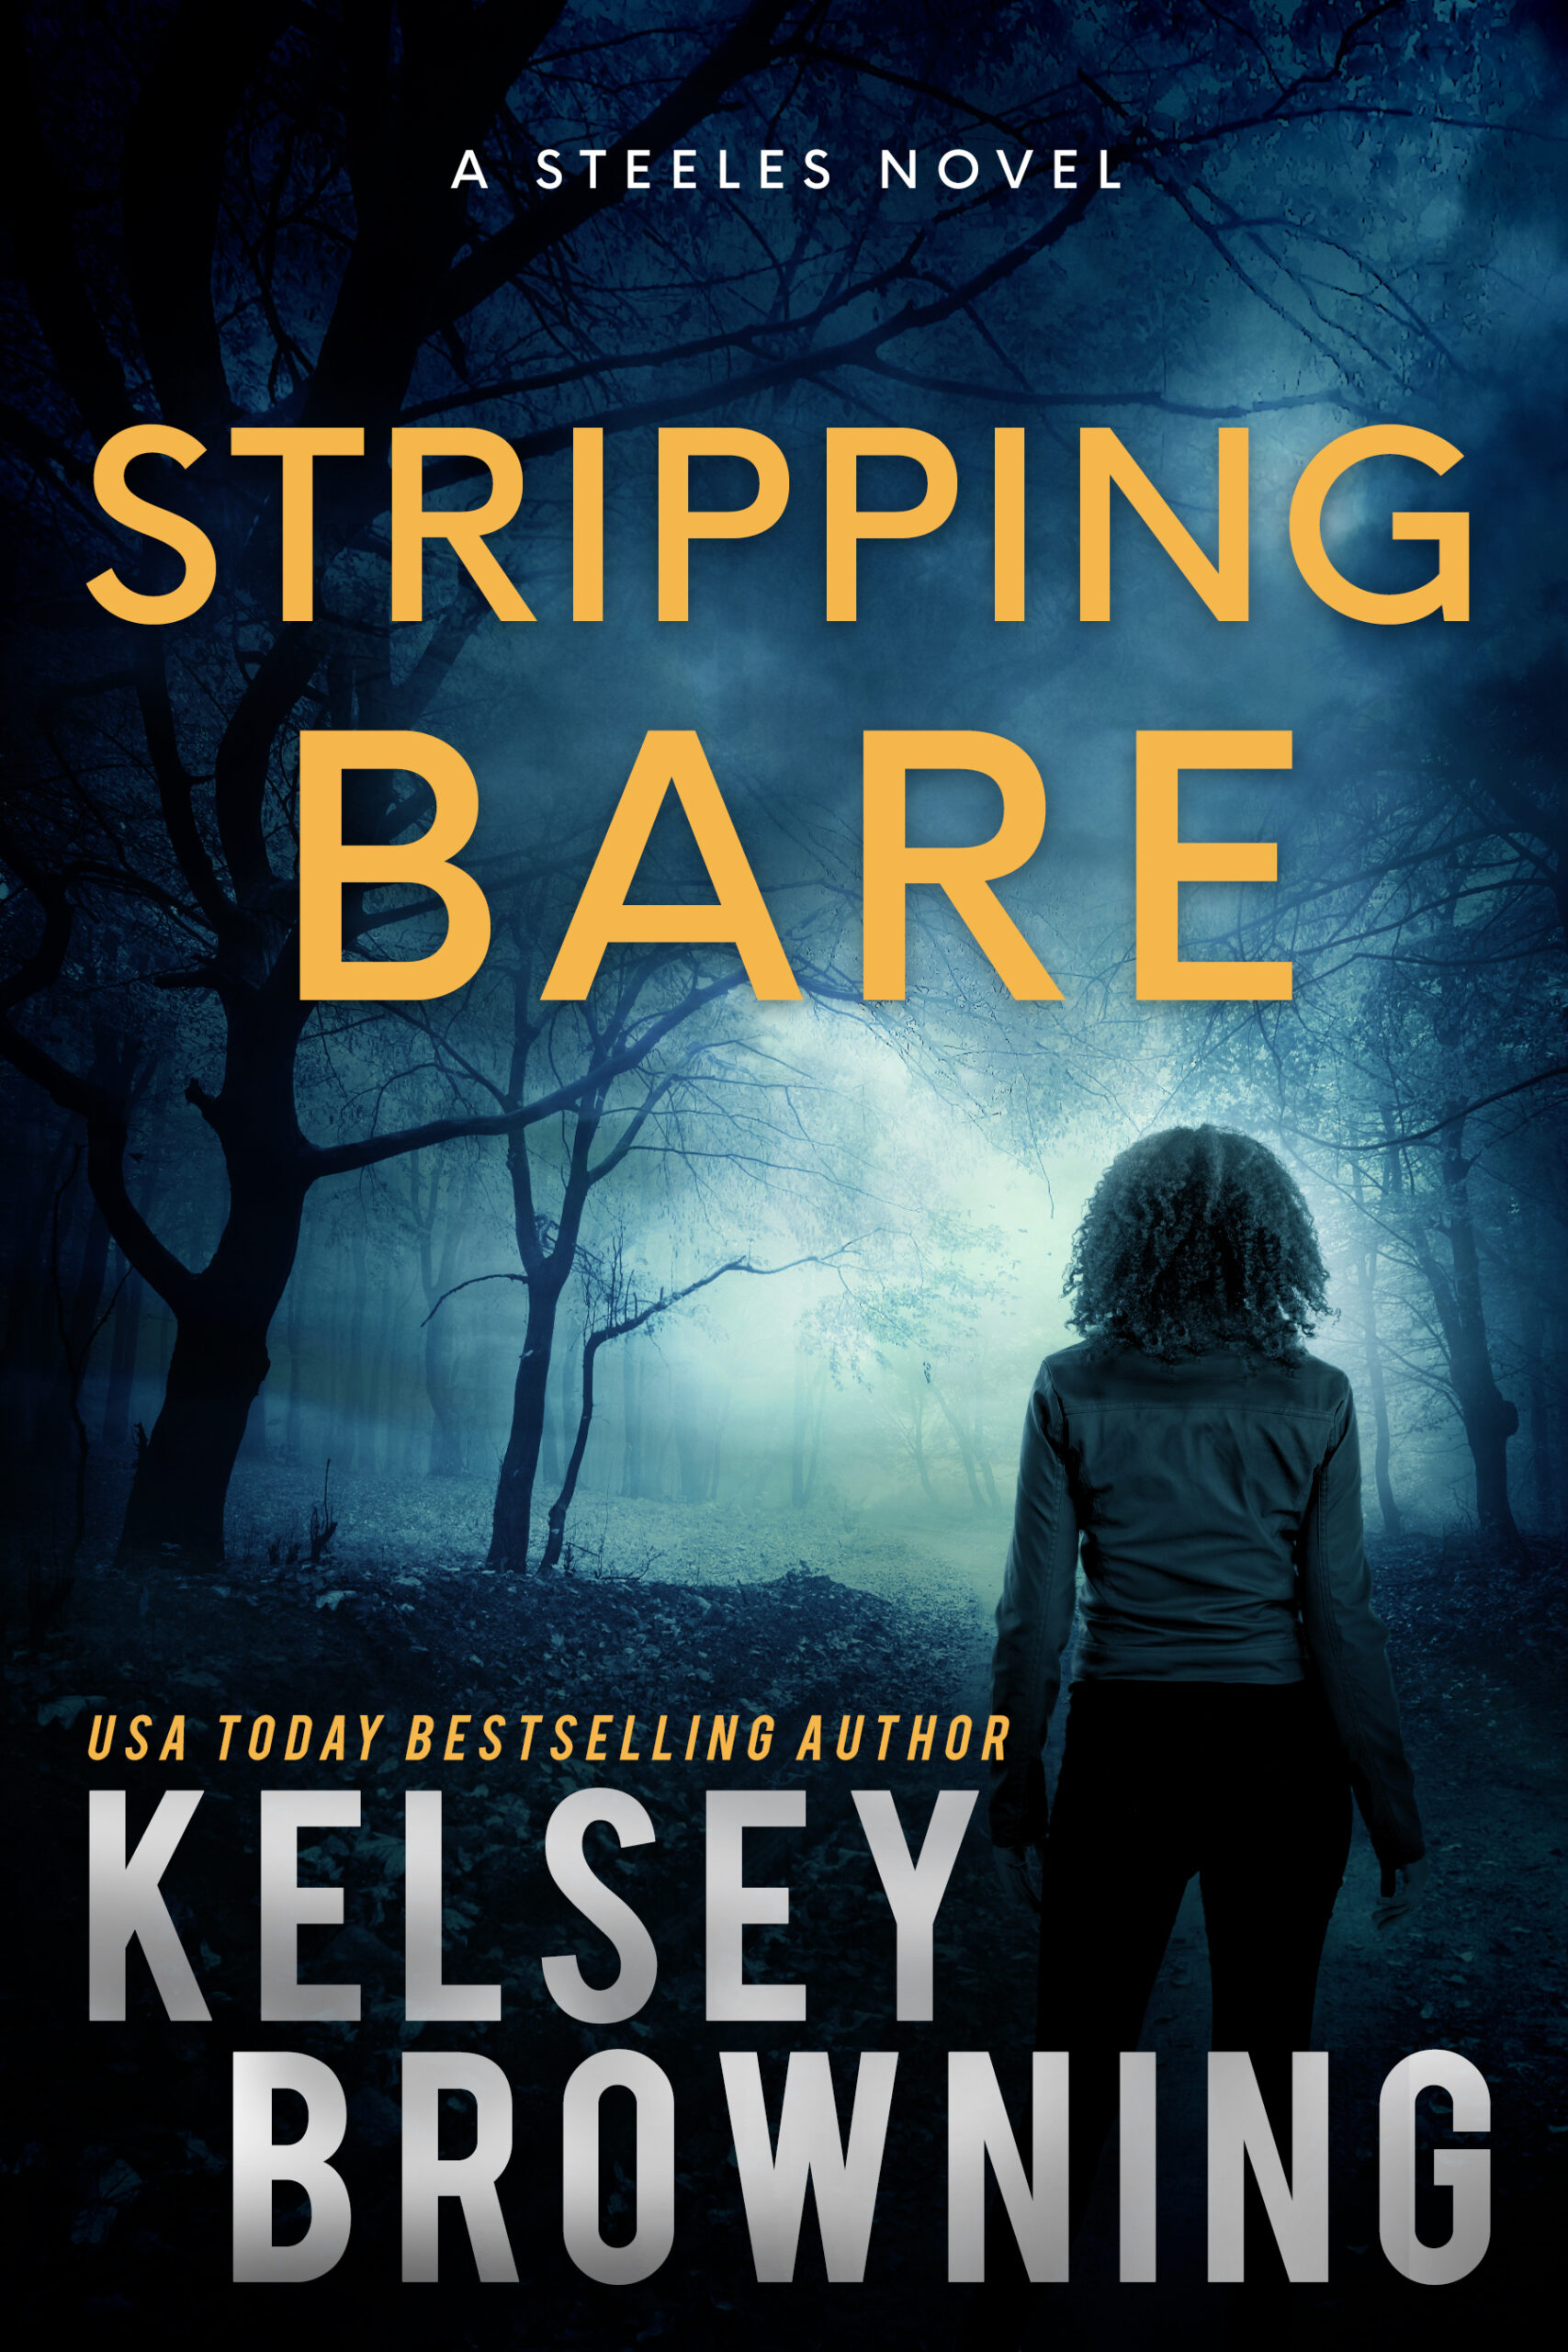 Cover of Stripping Bare by Kelsey Browning